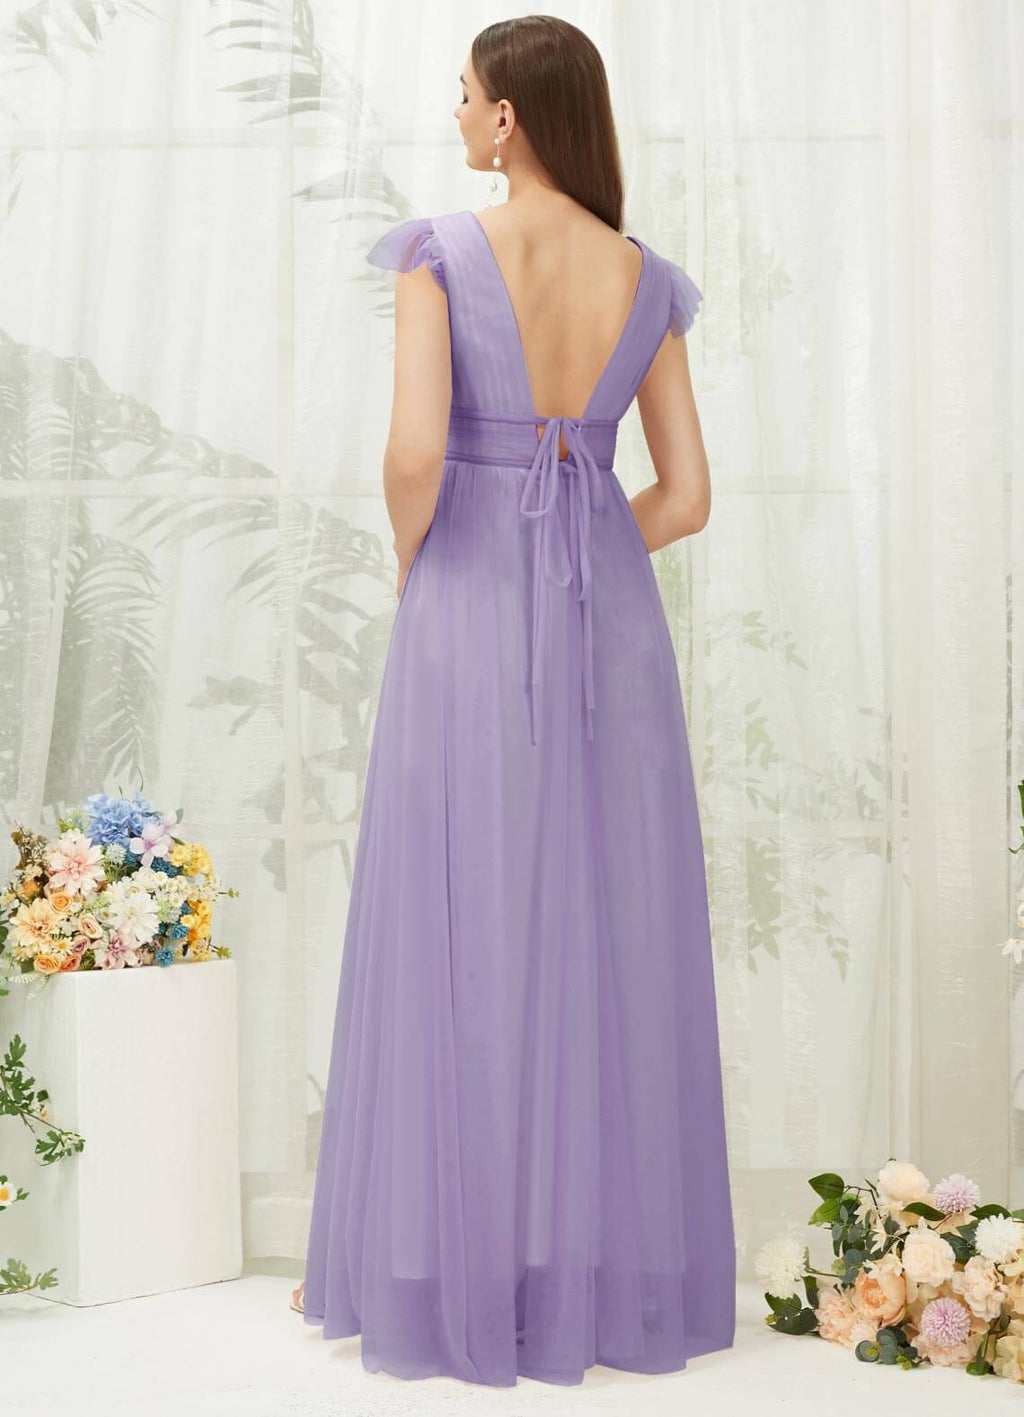 NZ Bridal Dusty Purple CapSleeves Tulle Maxi bridesmaid dresses R0410 Collins a